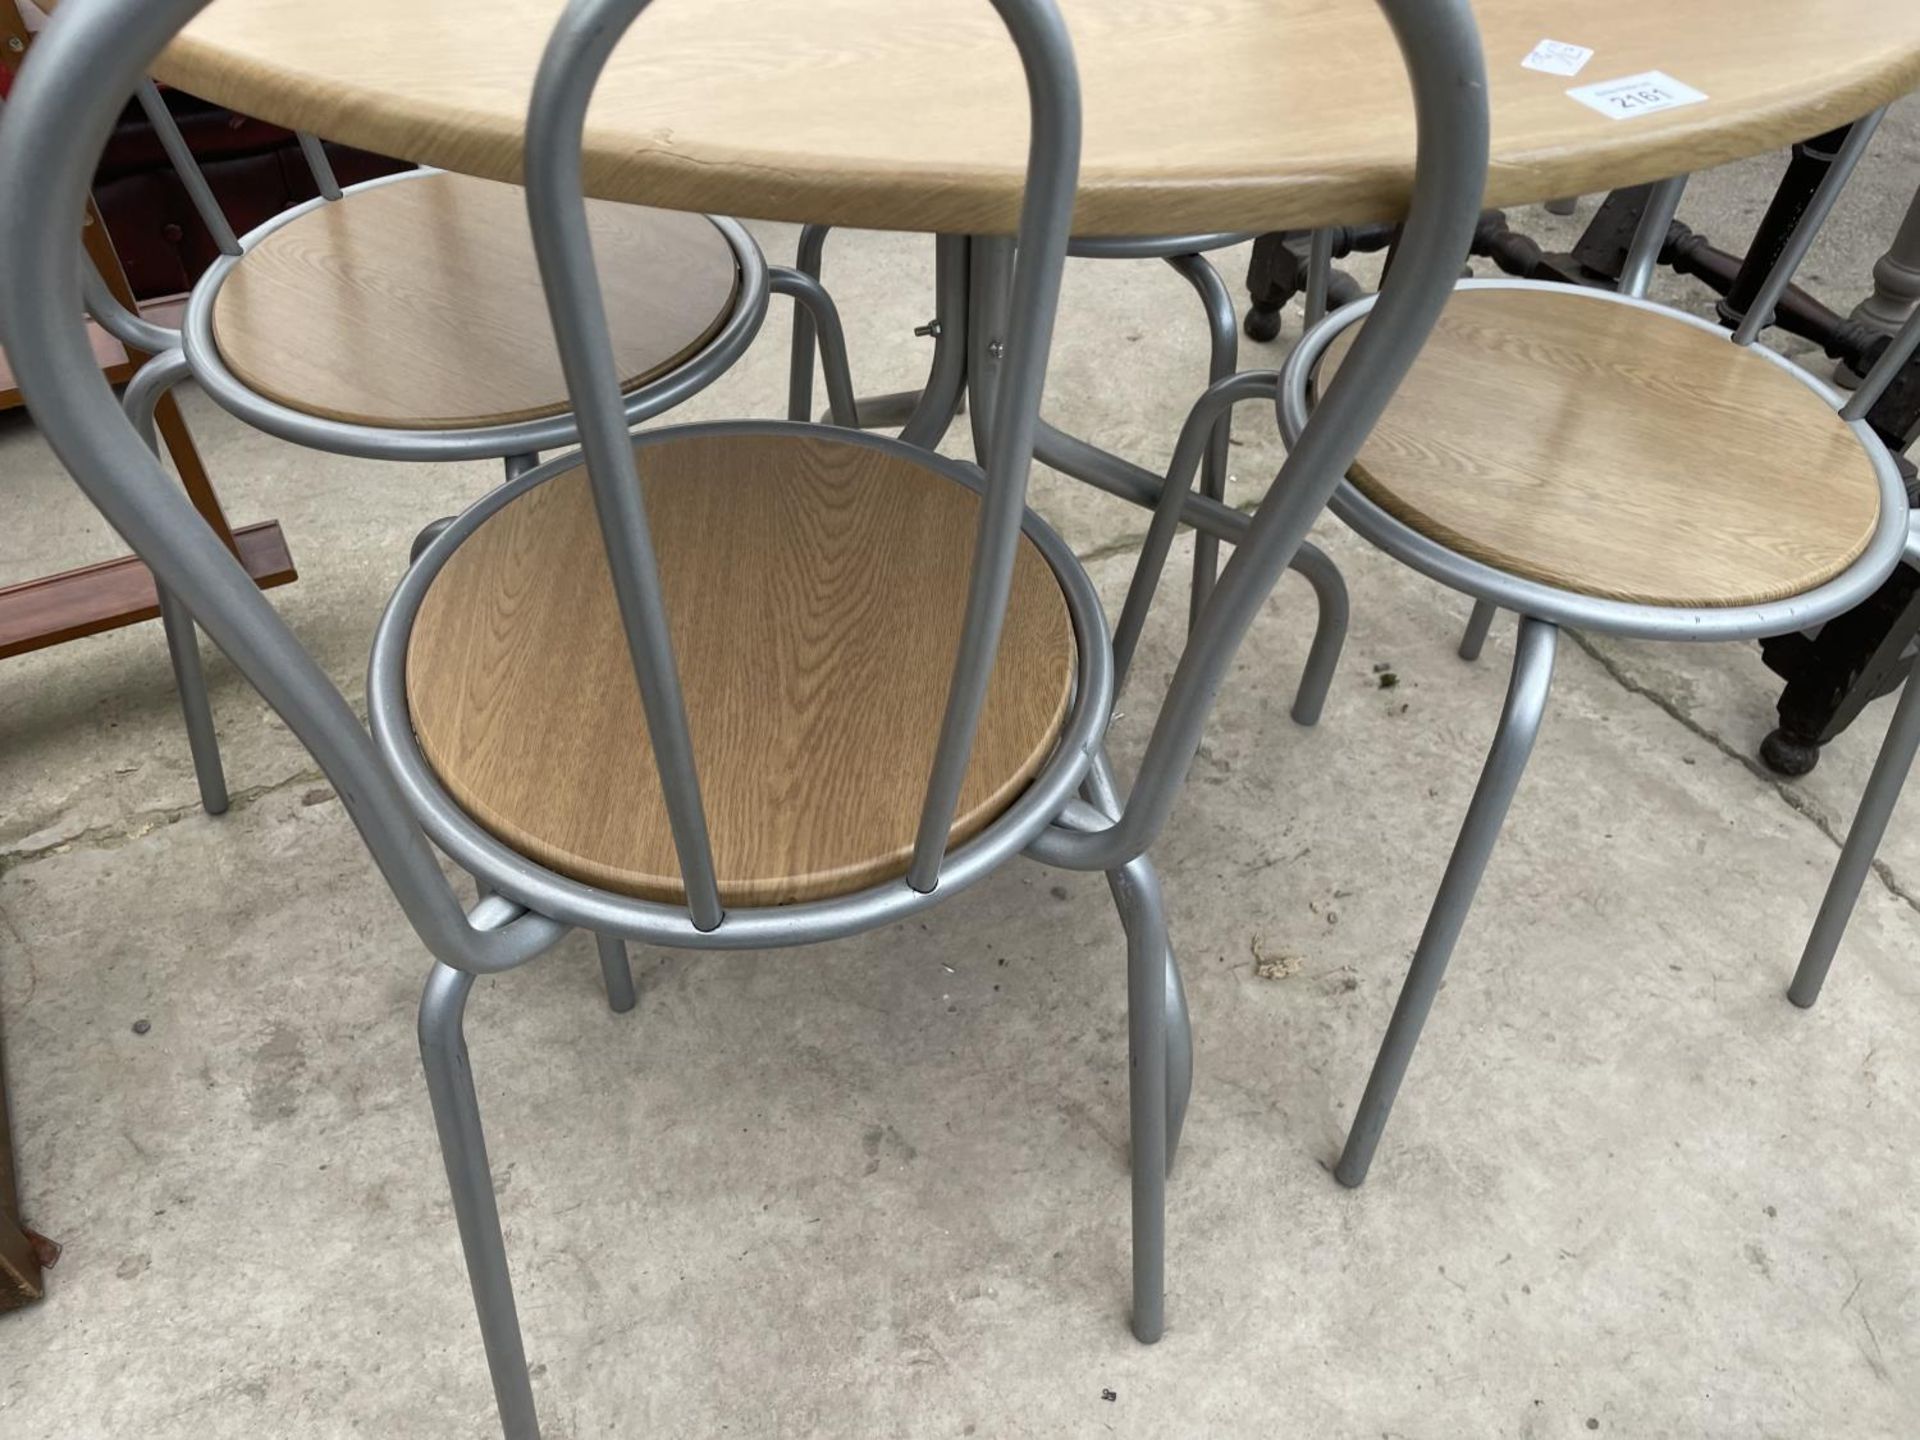 A CIRCULAR KITCHEN TABLE AND FOUR MATCHING CHAIRS - Image 3 of 3